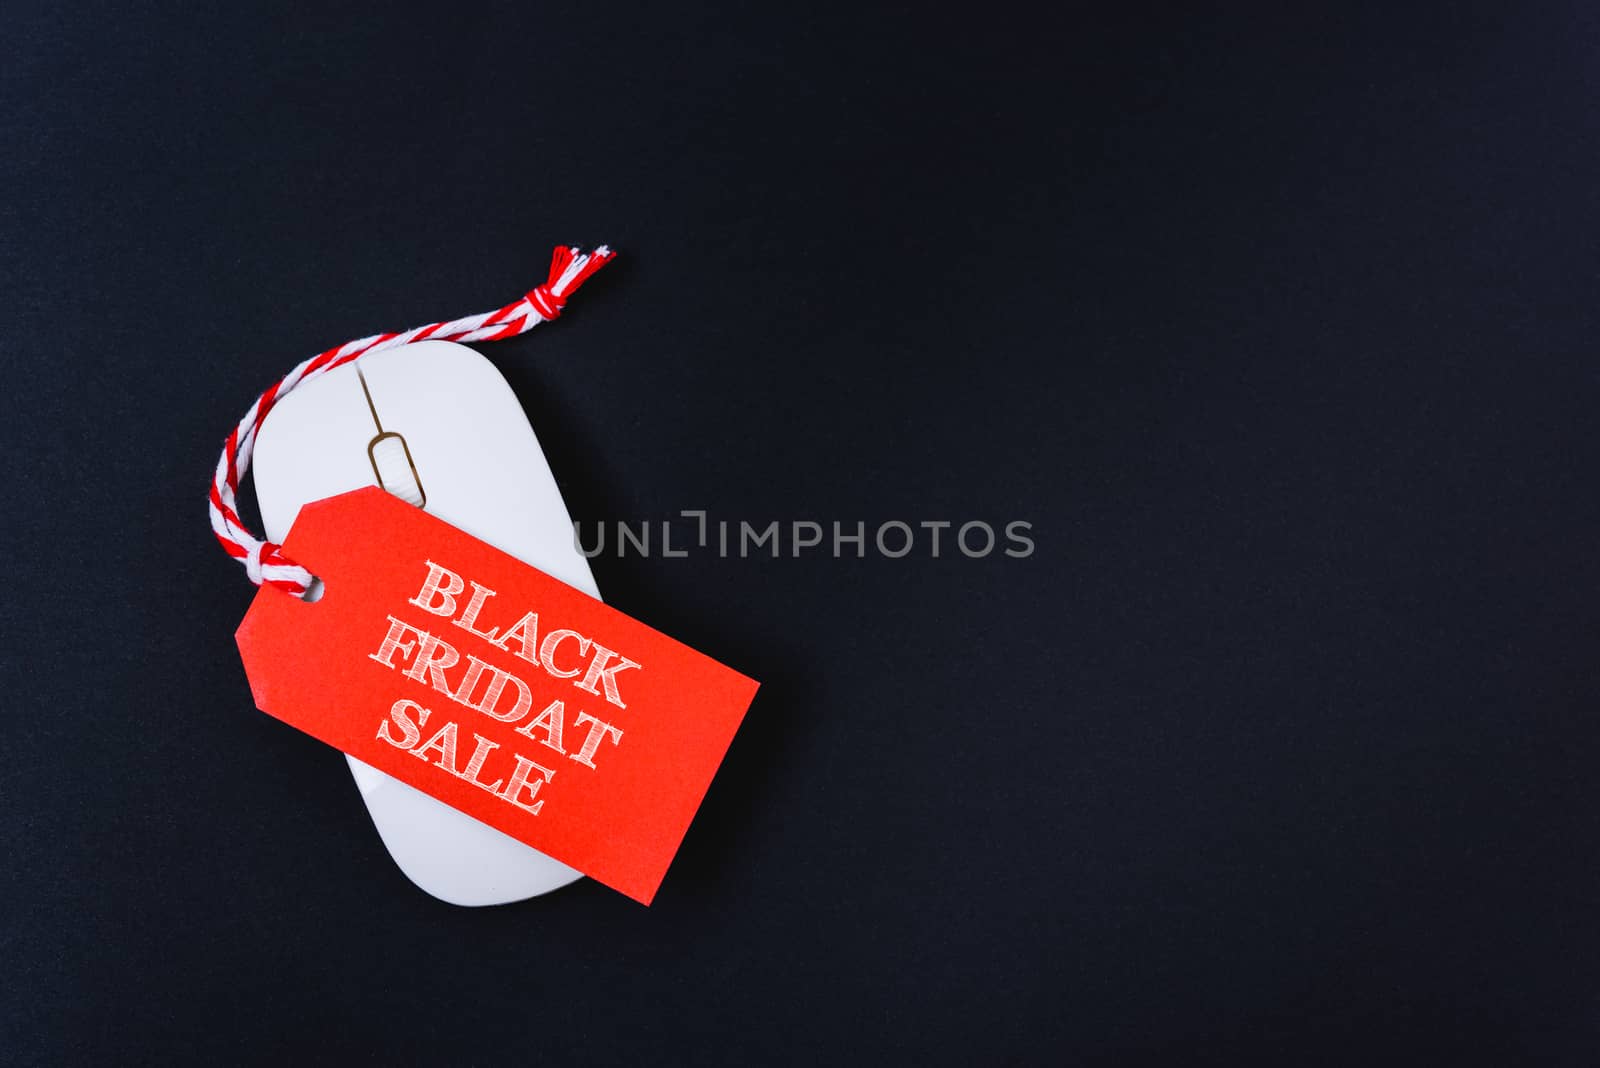 Online shopping Black Friday sale text red tag on white mouse with black background